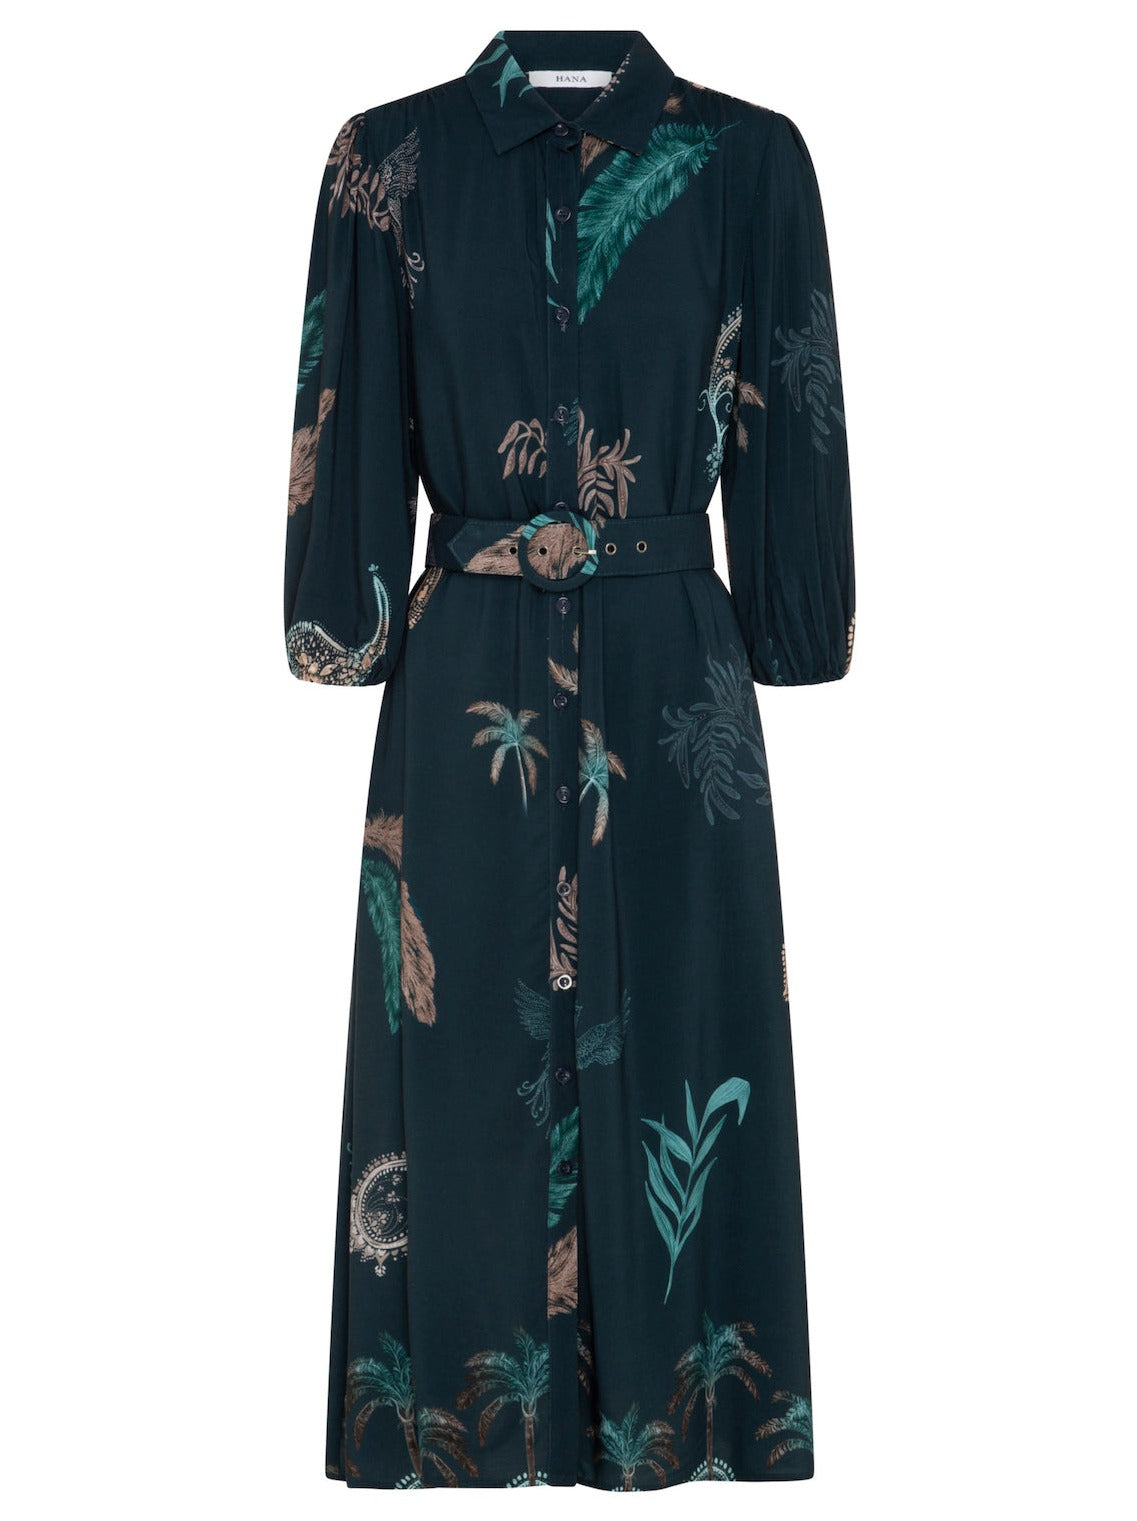 Womens boho long sleeve maxi shirt dress with belt teal palm tree print studio front view ghost mannequin